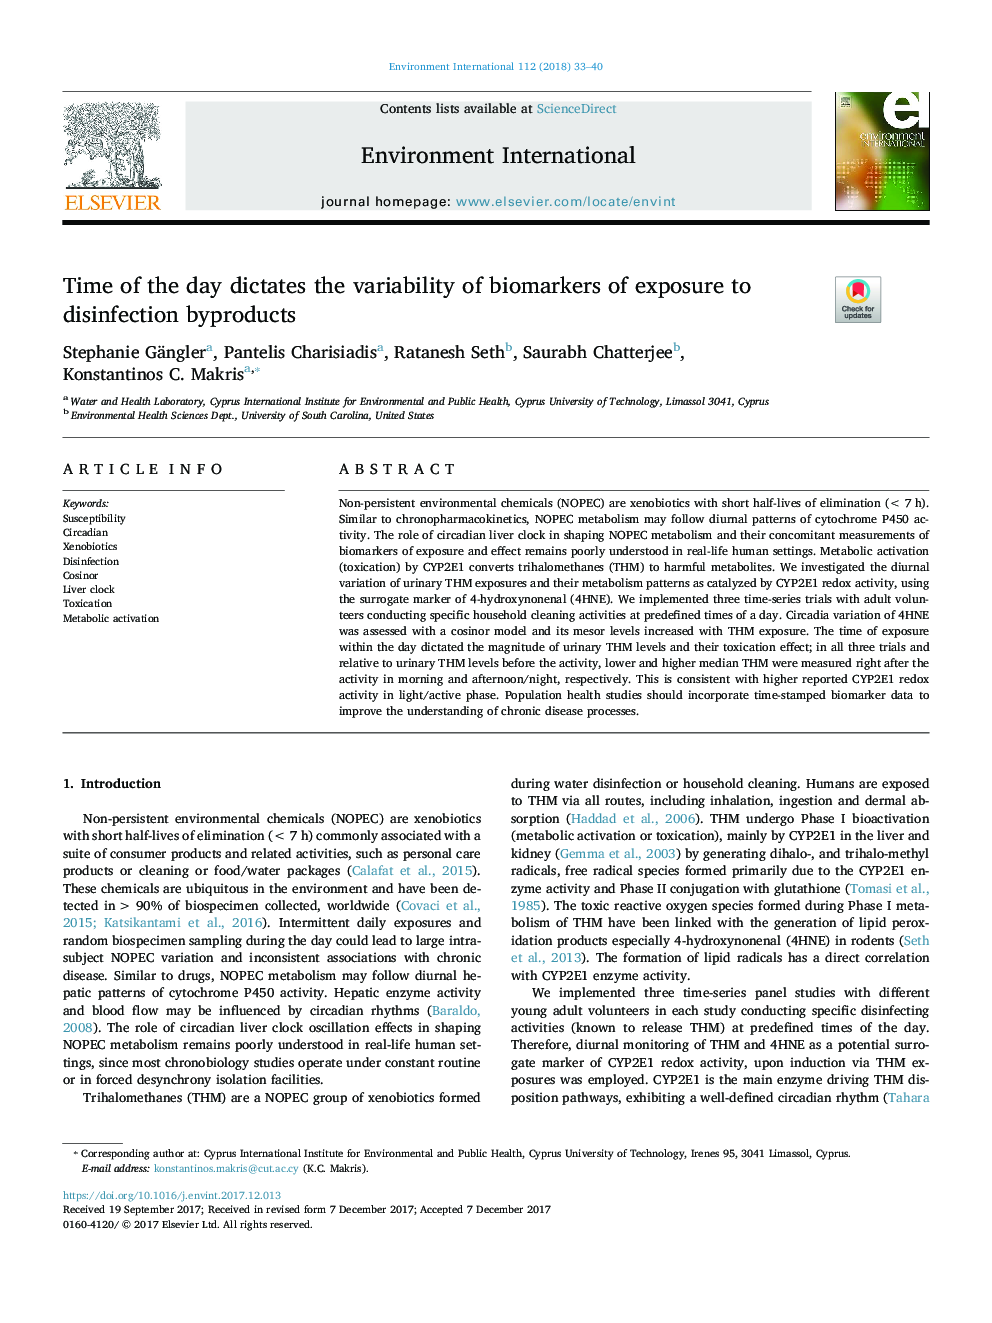 Time of the day dictates the variability of biomarkers of exposure to disinfection byproducts